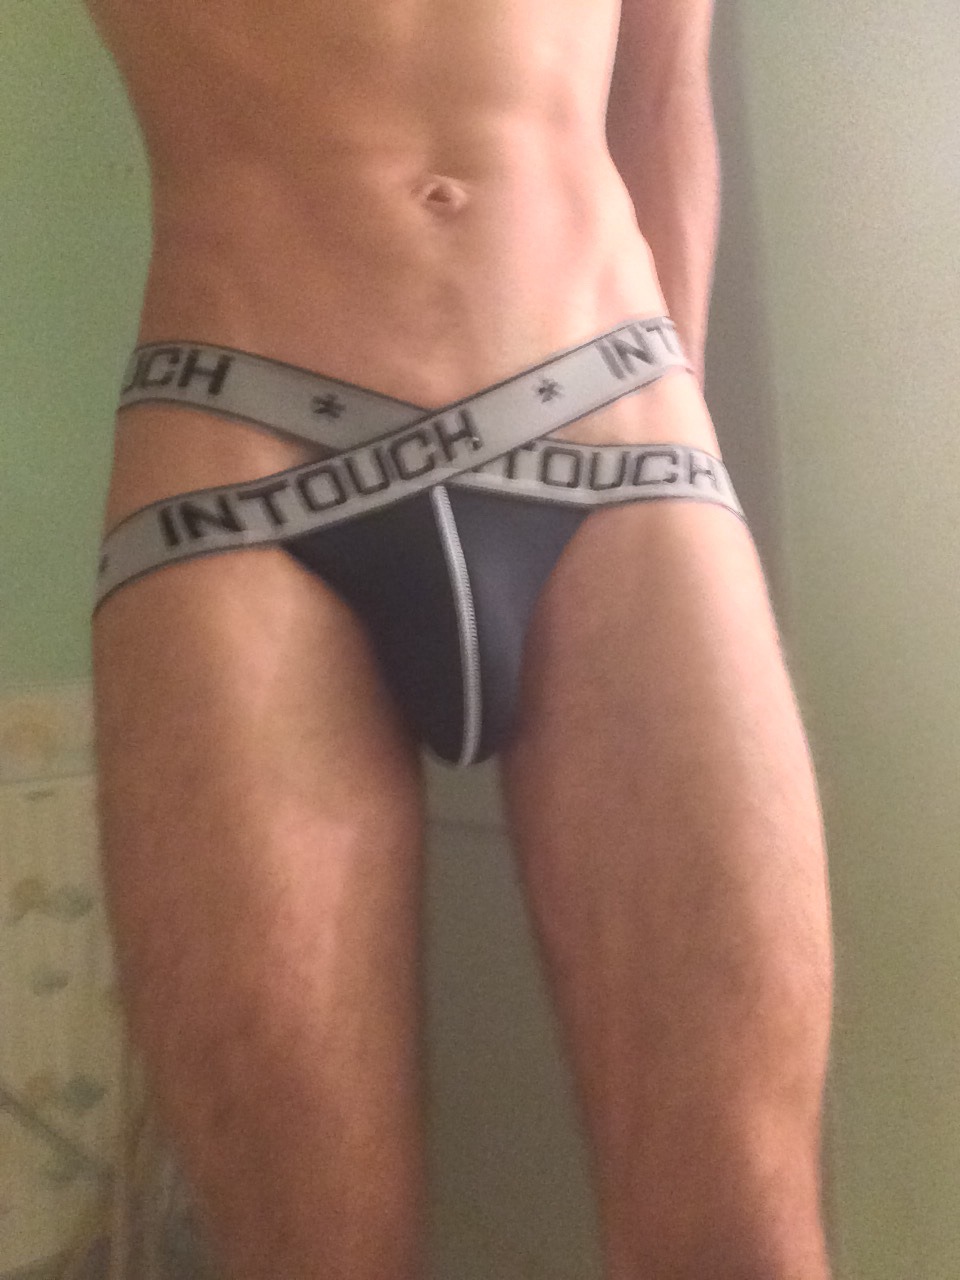 666-universe:Today I have the jockstrap on. If you see me in public don’t be afraid